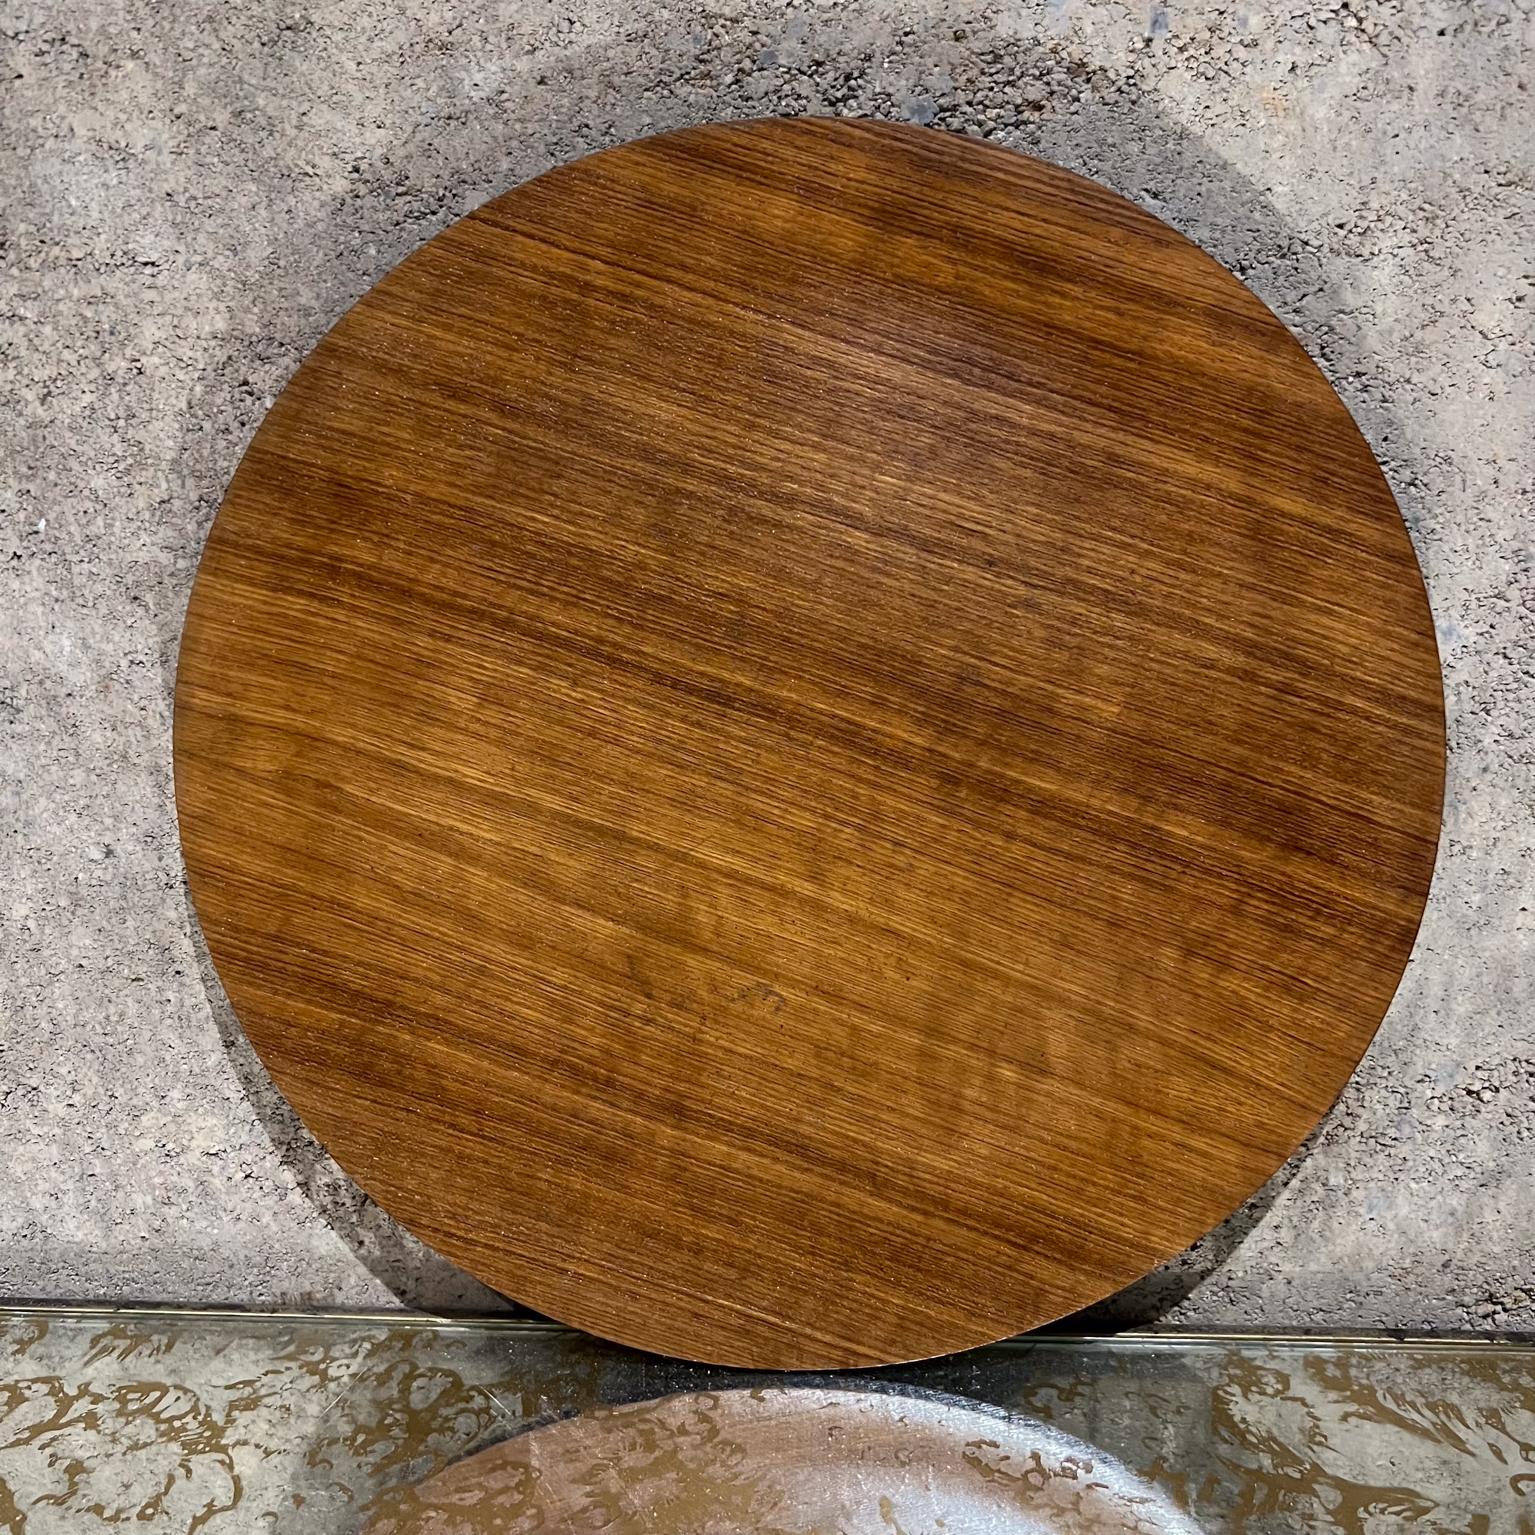 1970s Modernist Teak Wood Plate
Black backside
Round Platter
.5 h x 14.75 diameter
Preowned unrestored vintage condition, not new.
Refer to all images.